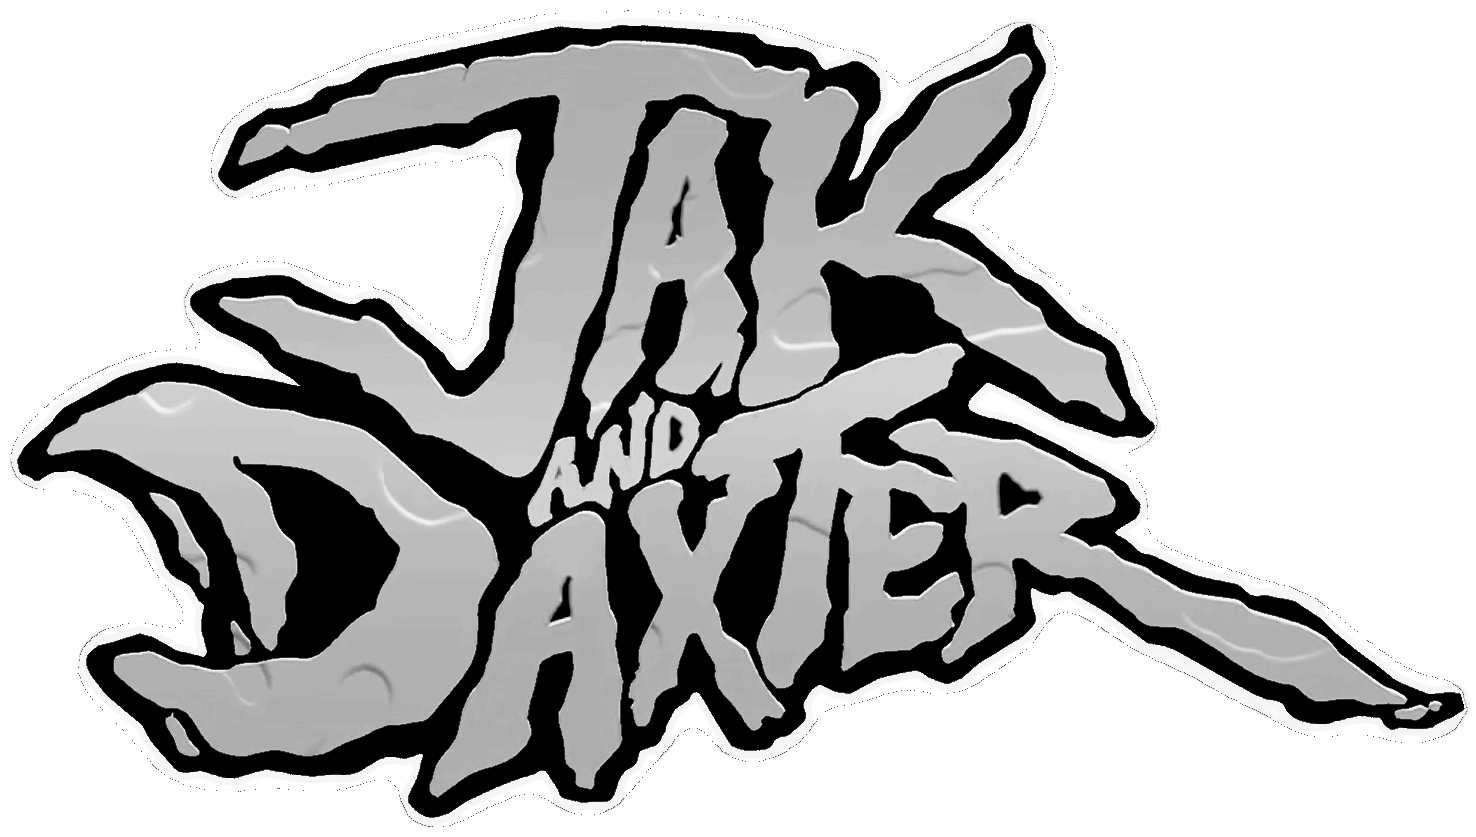 jak and daxter the precursor legacy ps3